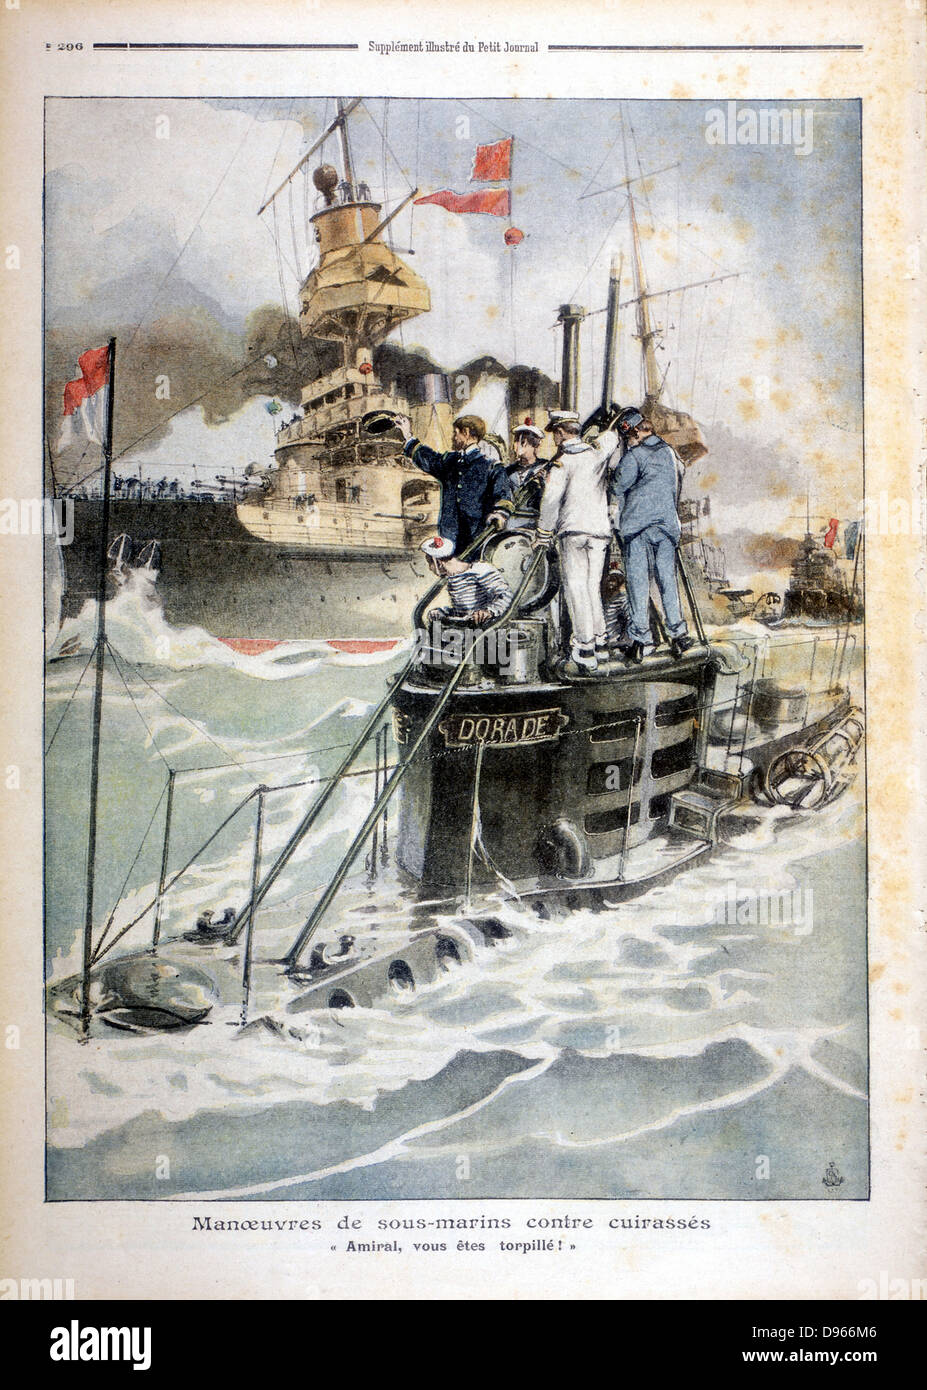 French naval exercises: Submarine 'Dorade' surfacing to tell an ironclad that it has been 'sunk'. Illustration from 'Le Petit Journal', Paris, 1908. Stock Photo